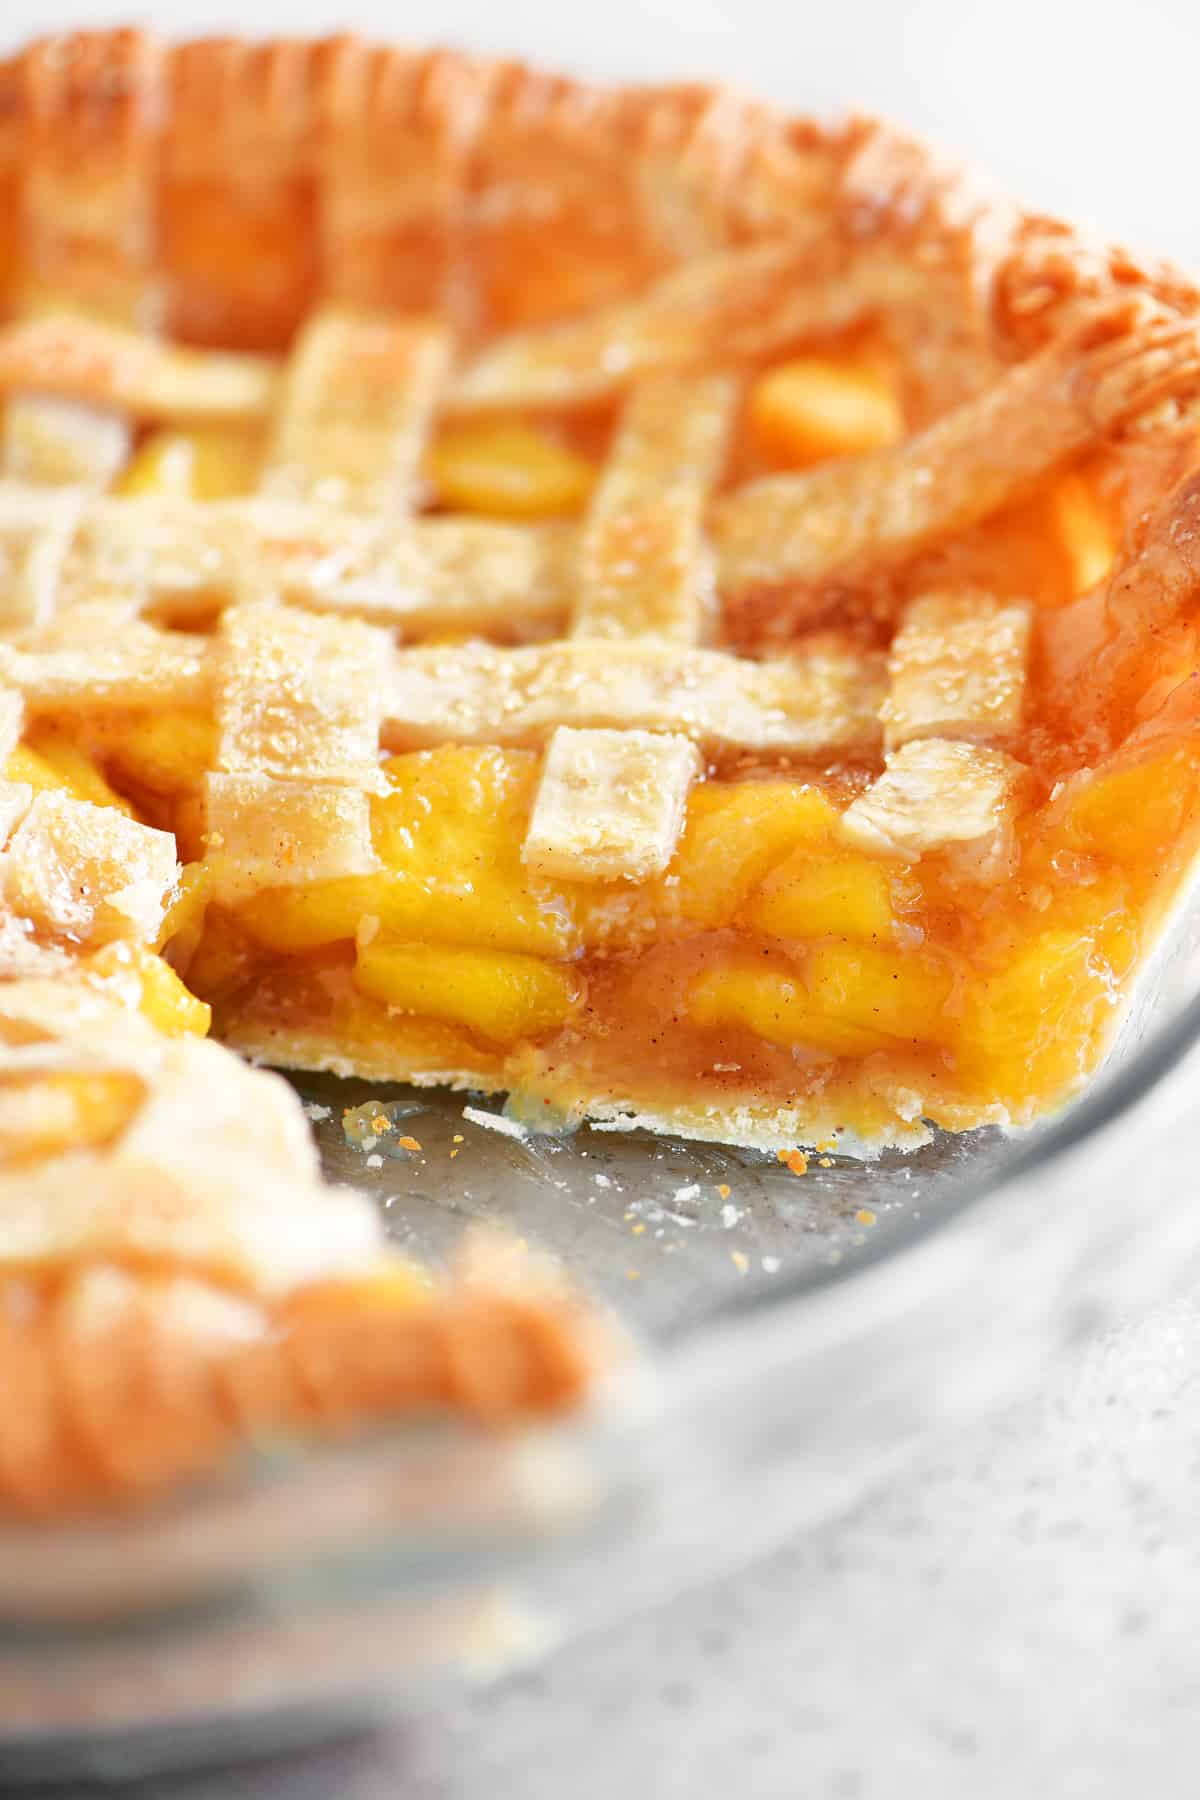 view of inside of peach pie